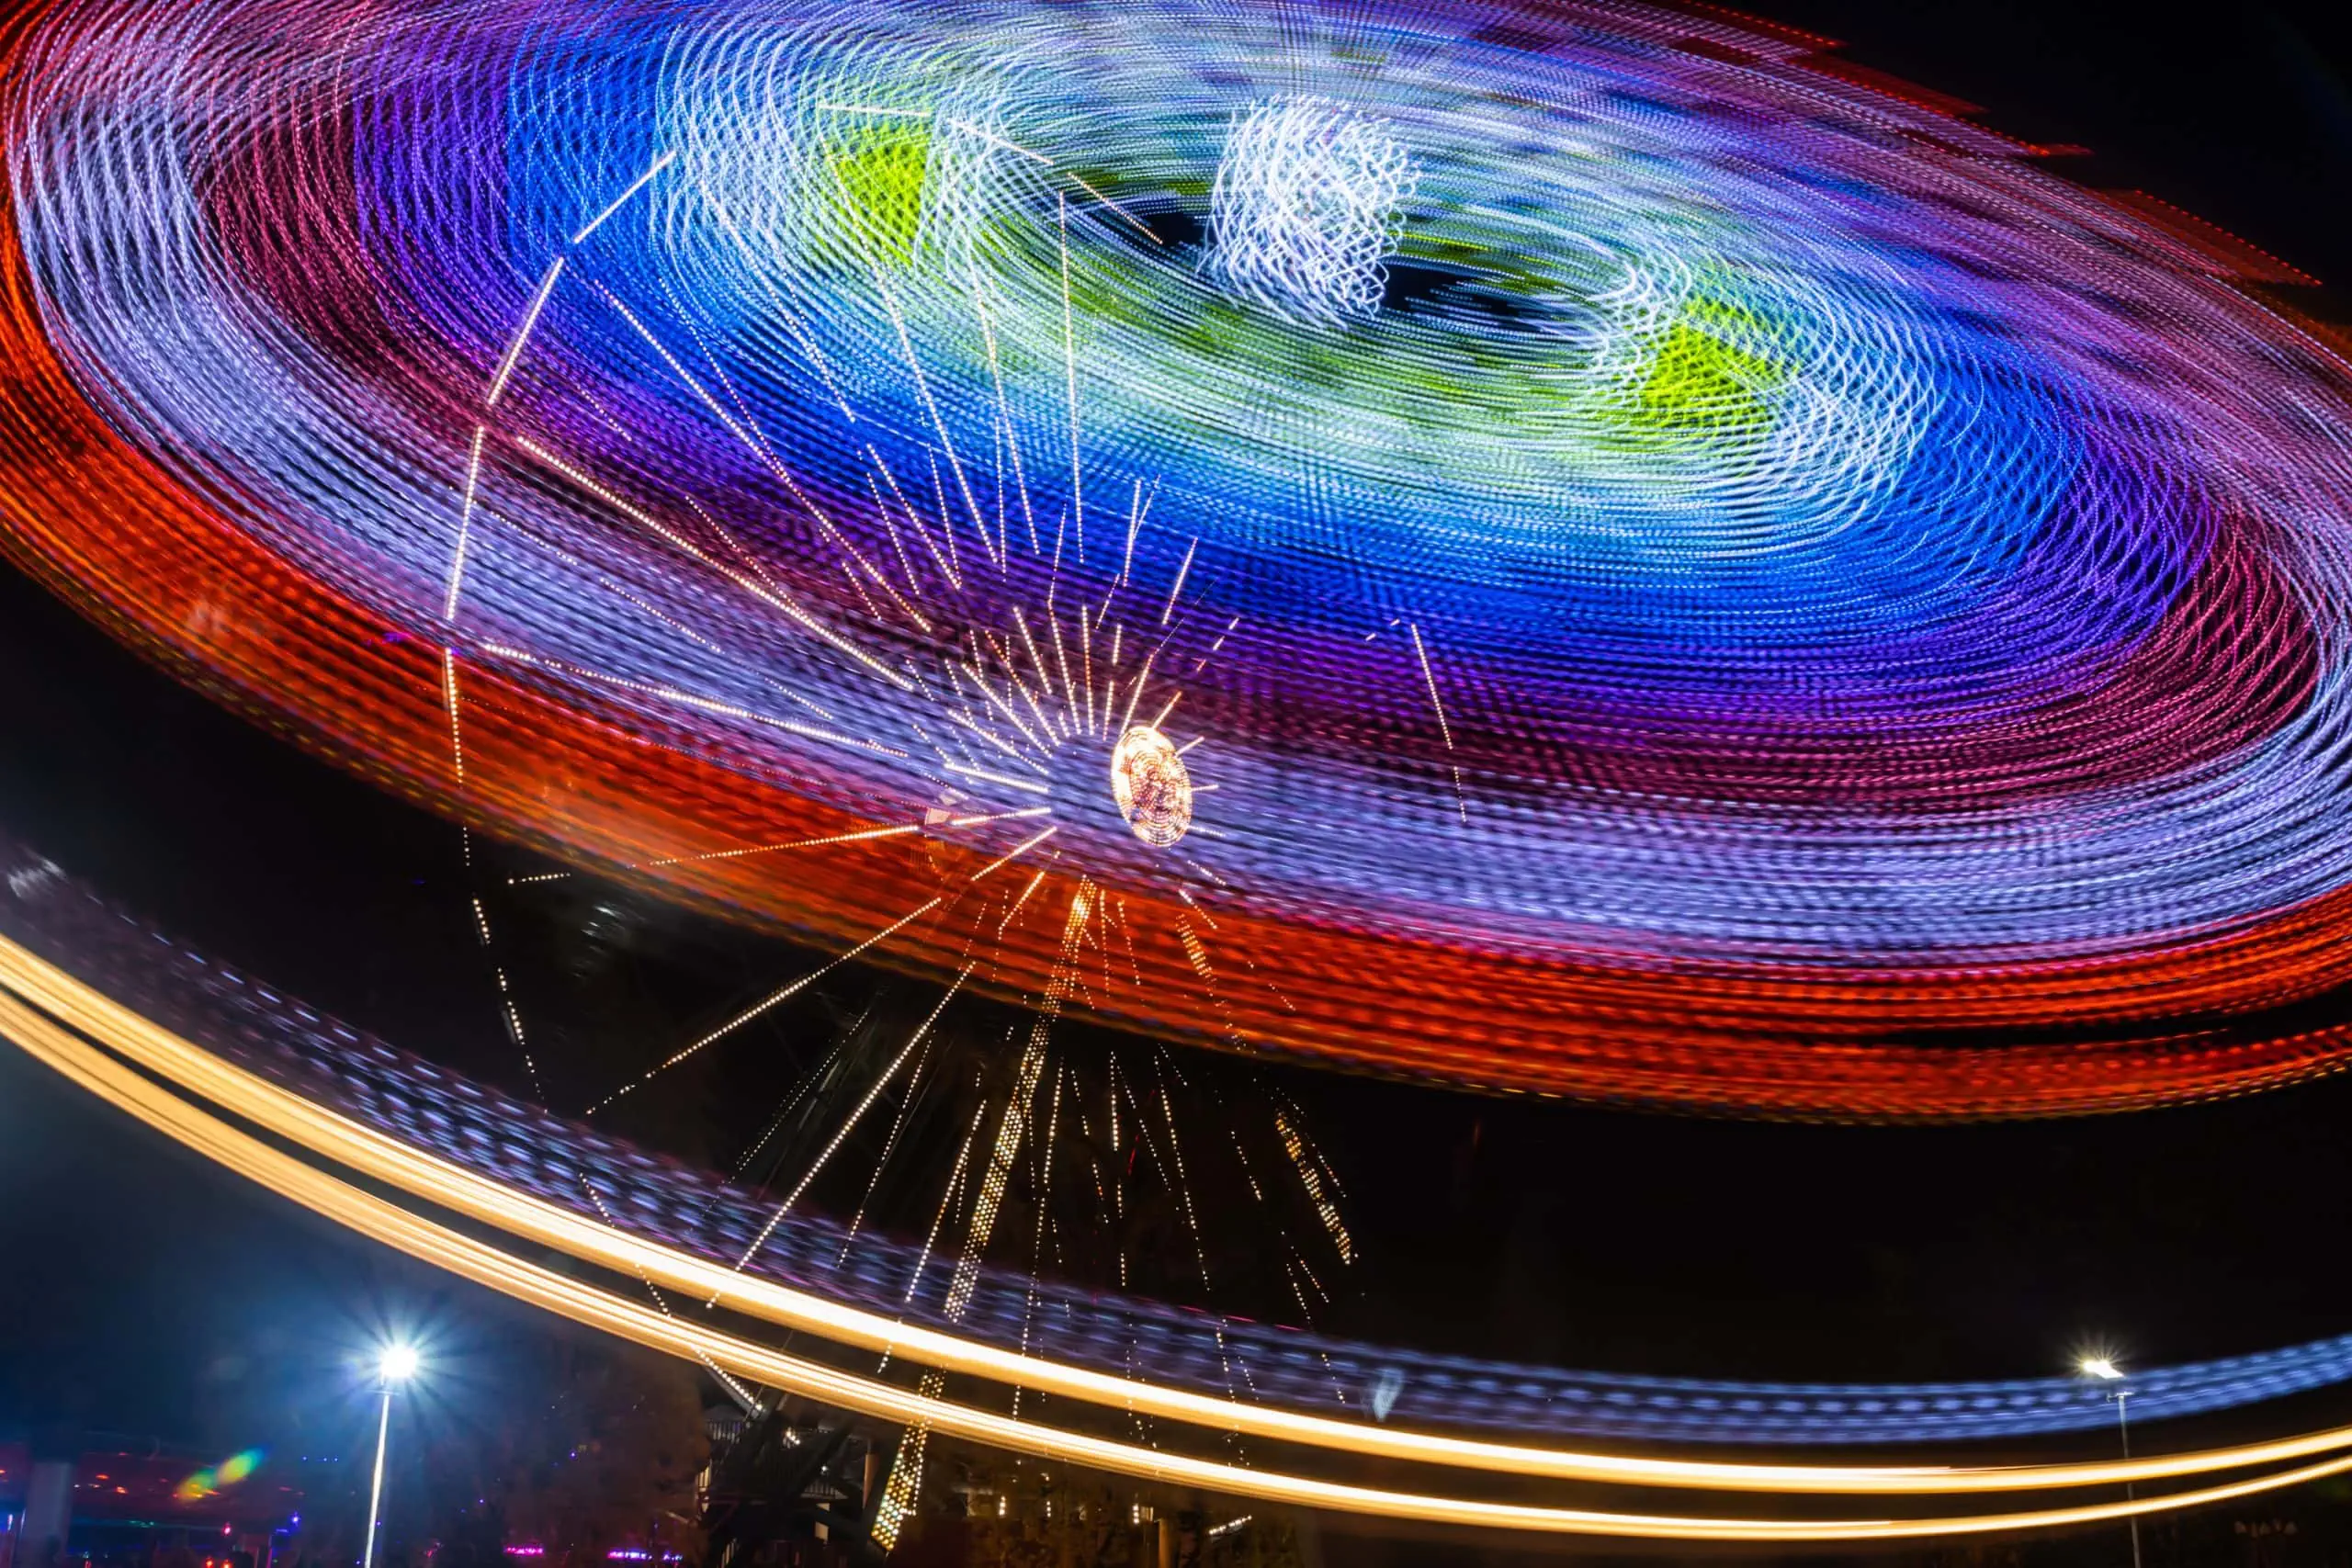 Two rides in motion in amusement park, night illumination. Long exposure.